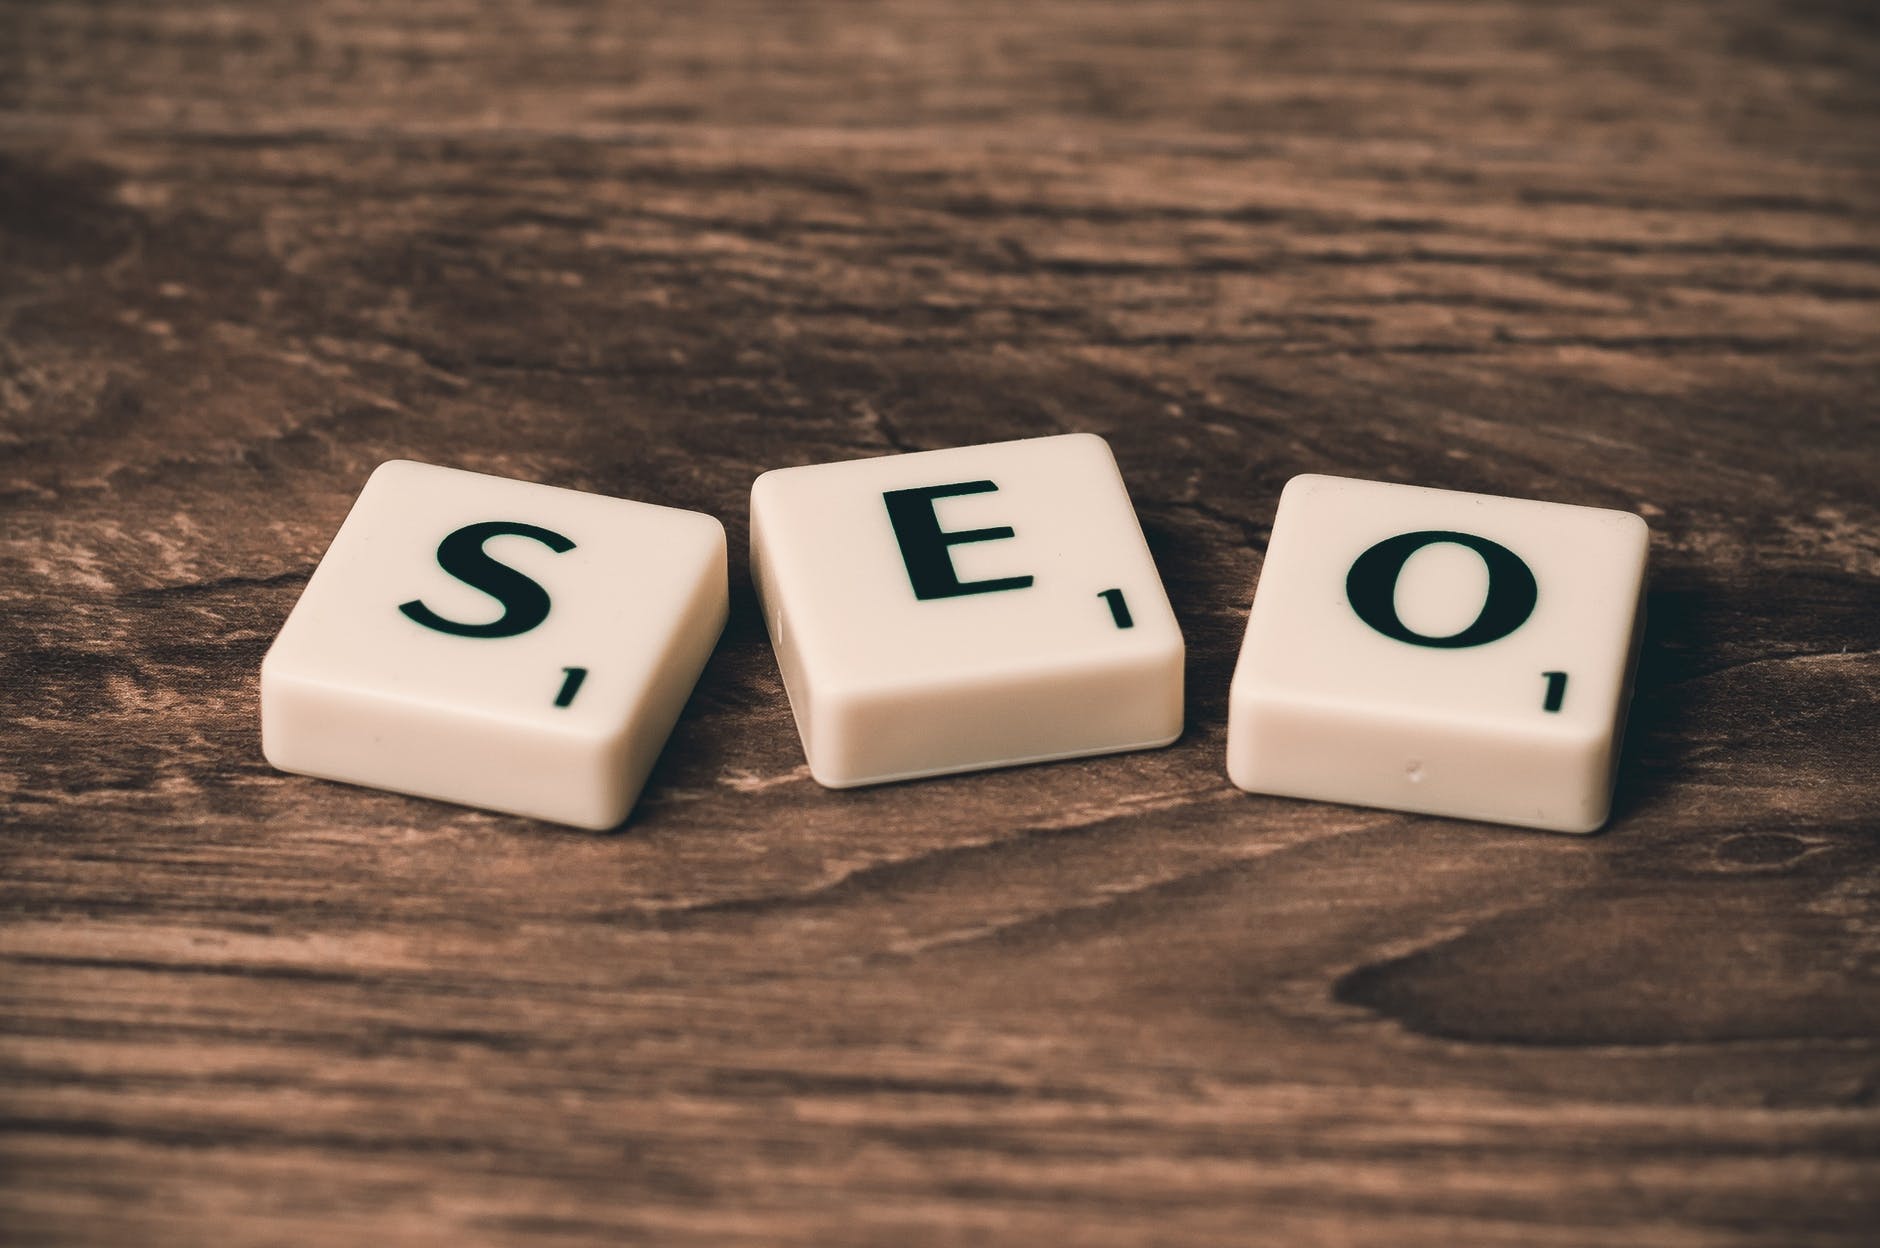 The Complete SEO Guide for Beginners: A blog about SEO tips